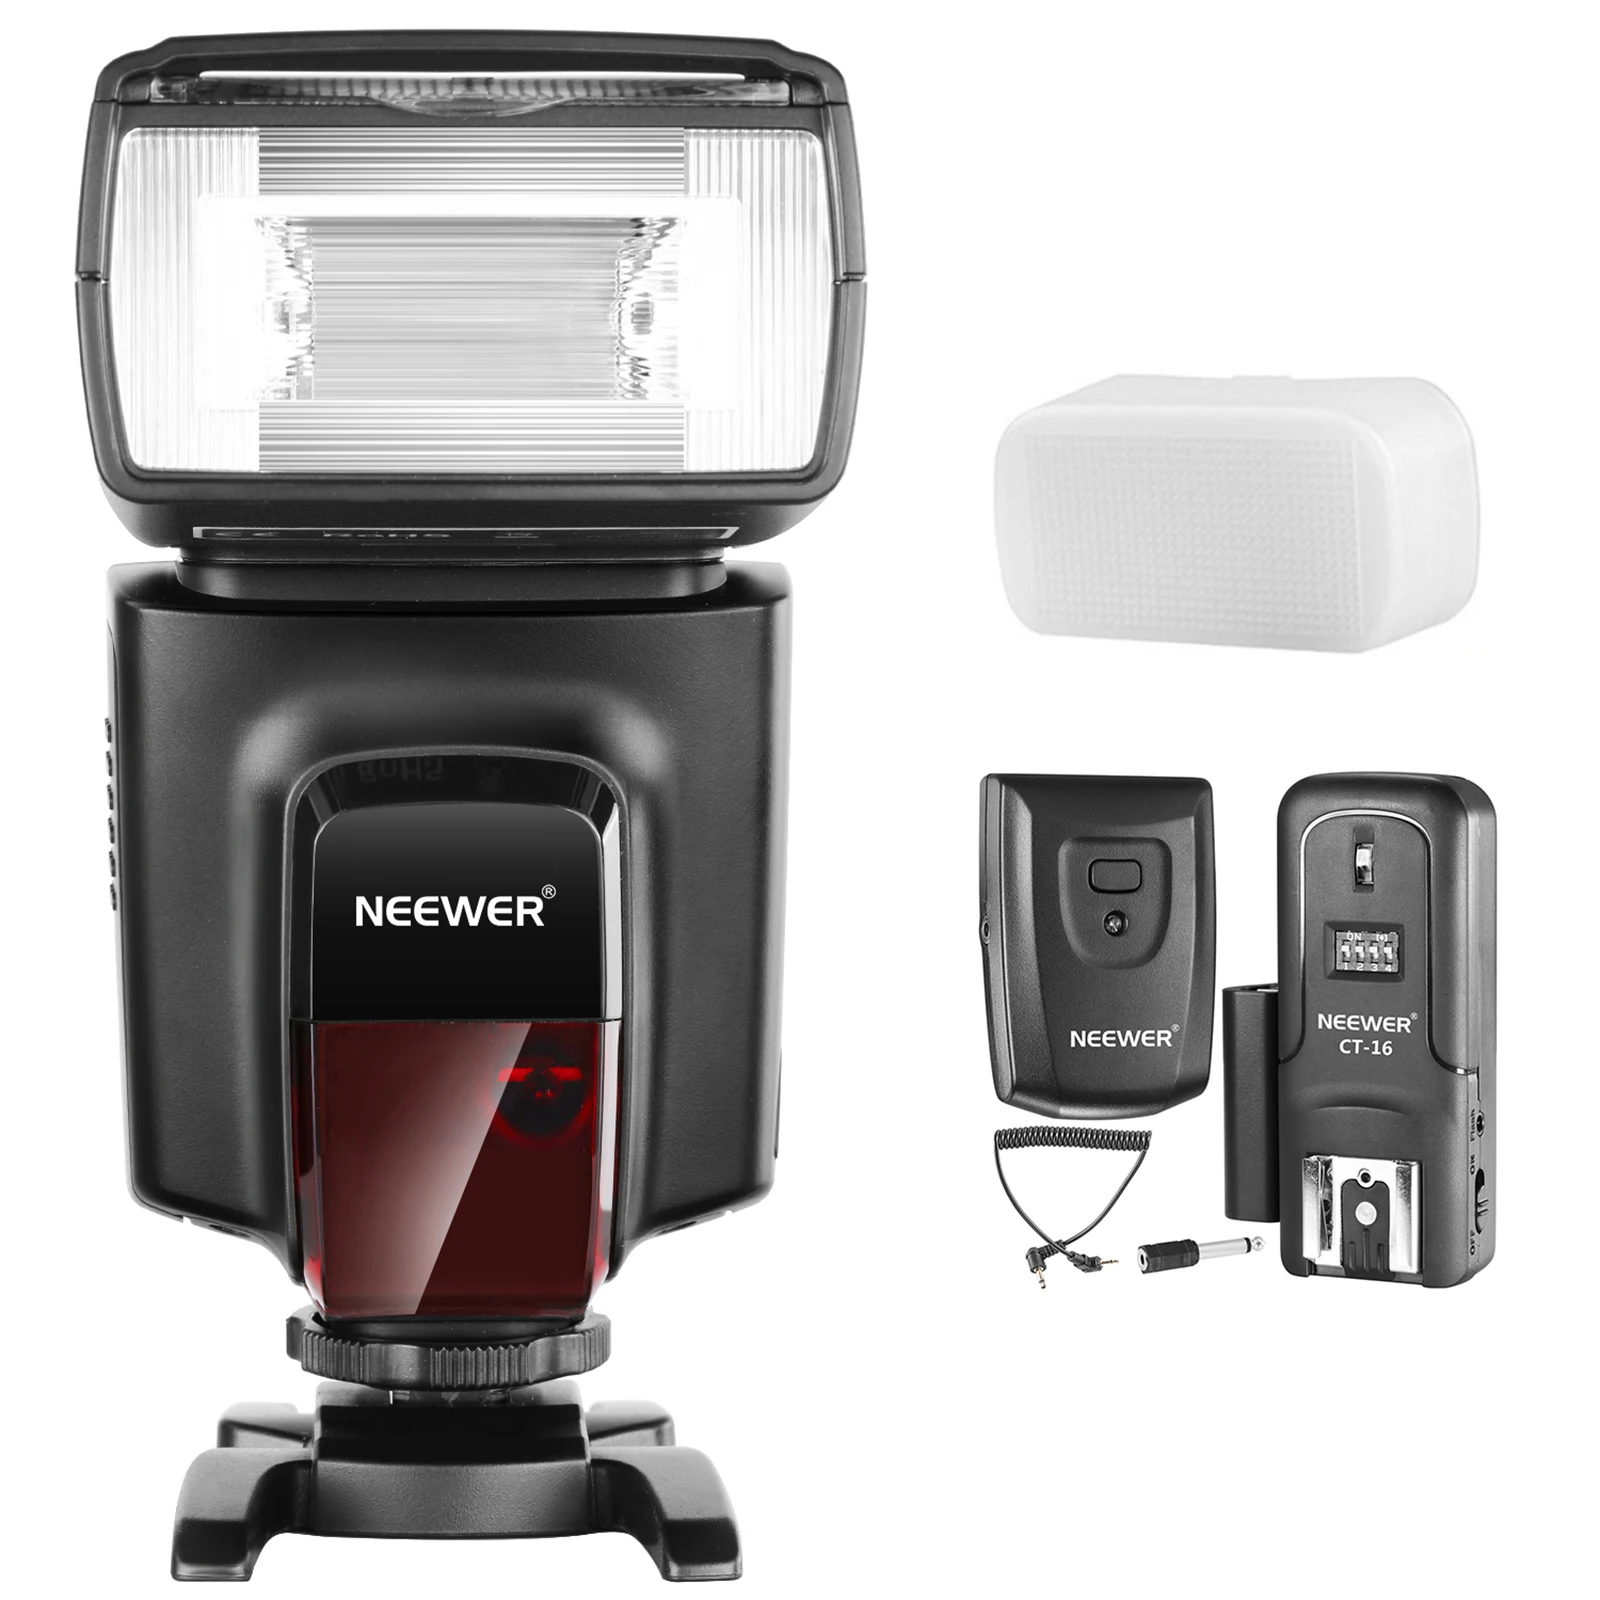 

Neewer TT560 Flash Speedlite With CT-16 Wireless Trigger For Canon Nikon Panasonic Olympus Pentax/Other DSLR Cameras, Diffuser